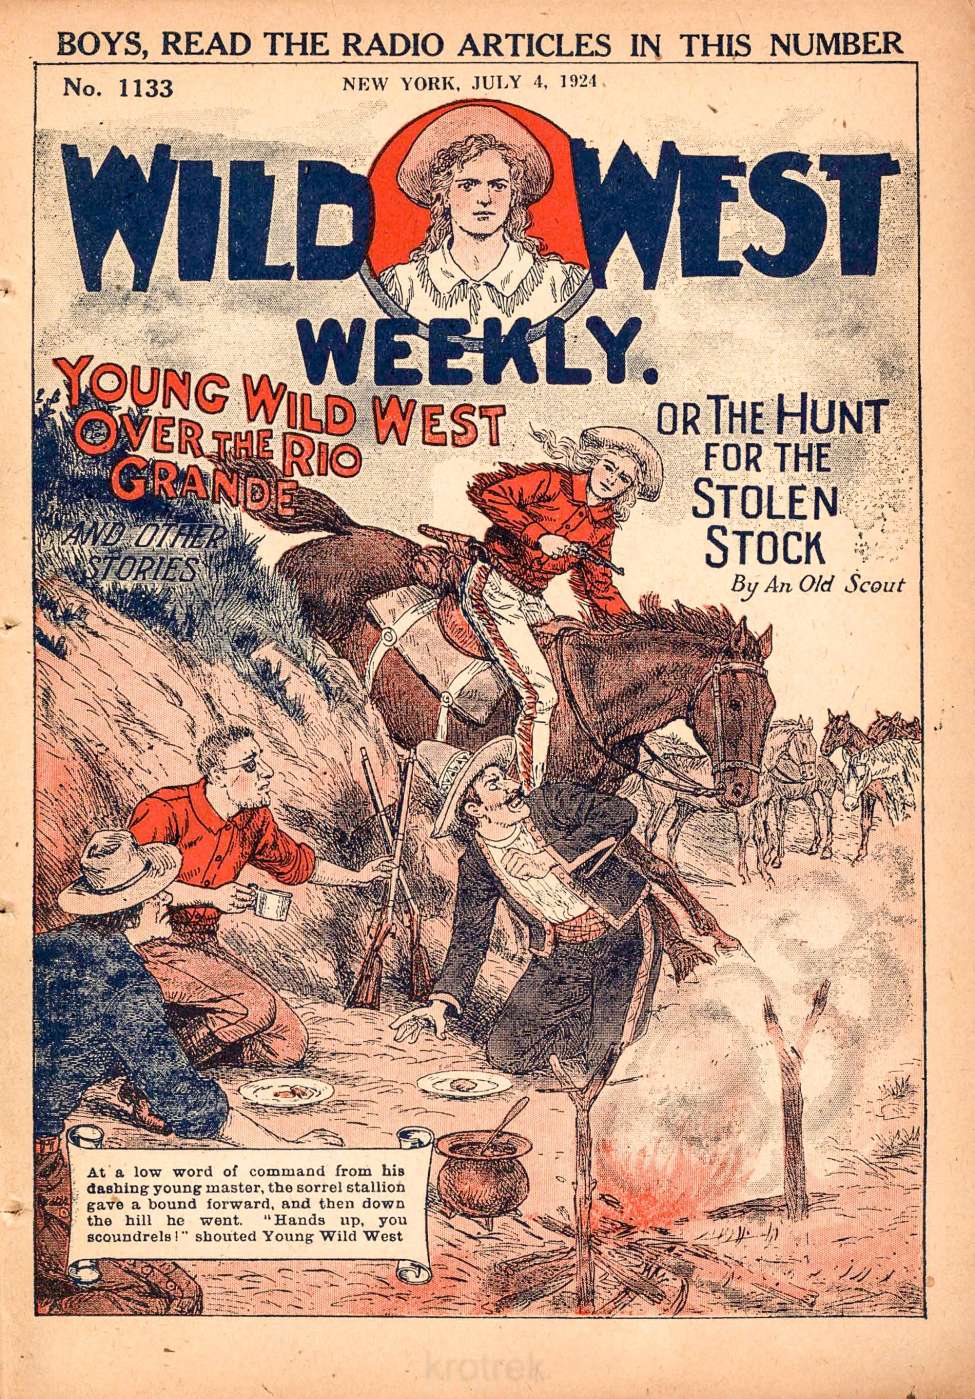 Book Cover For Wild West Weekly 1133 - Young Wild West over the Rio Grande